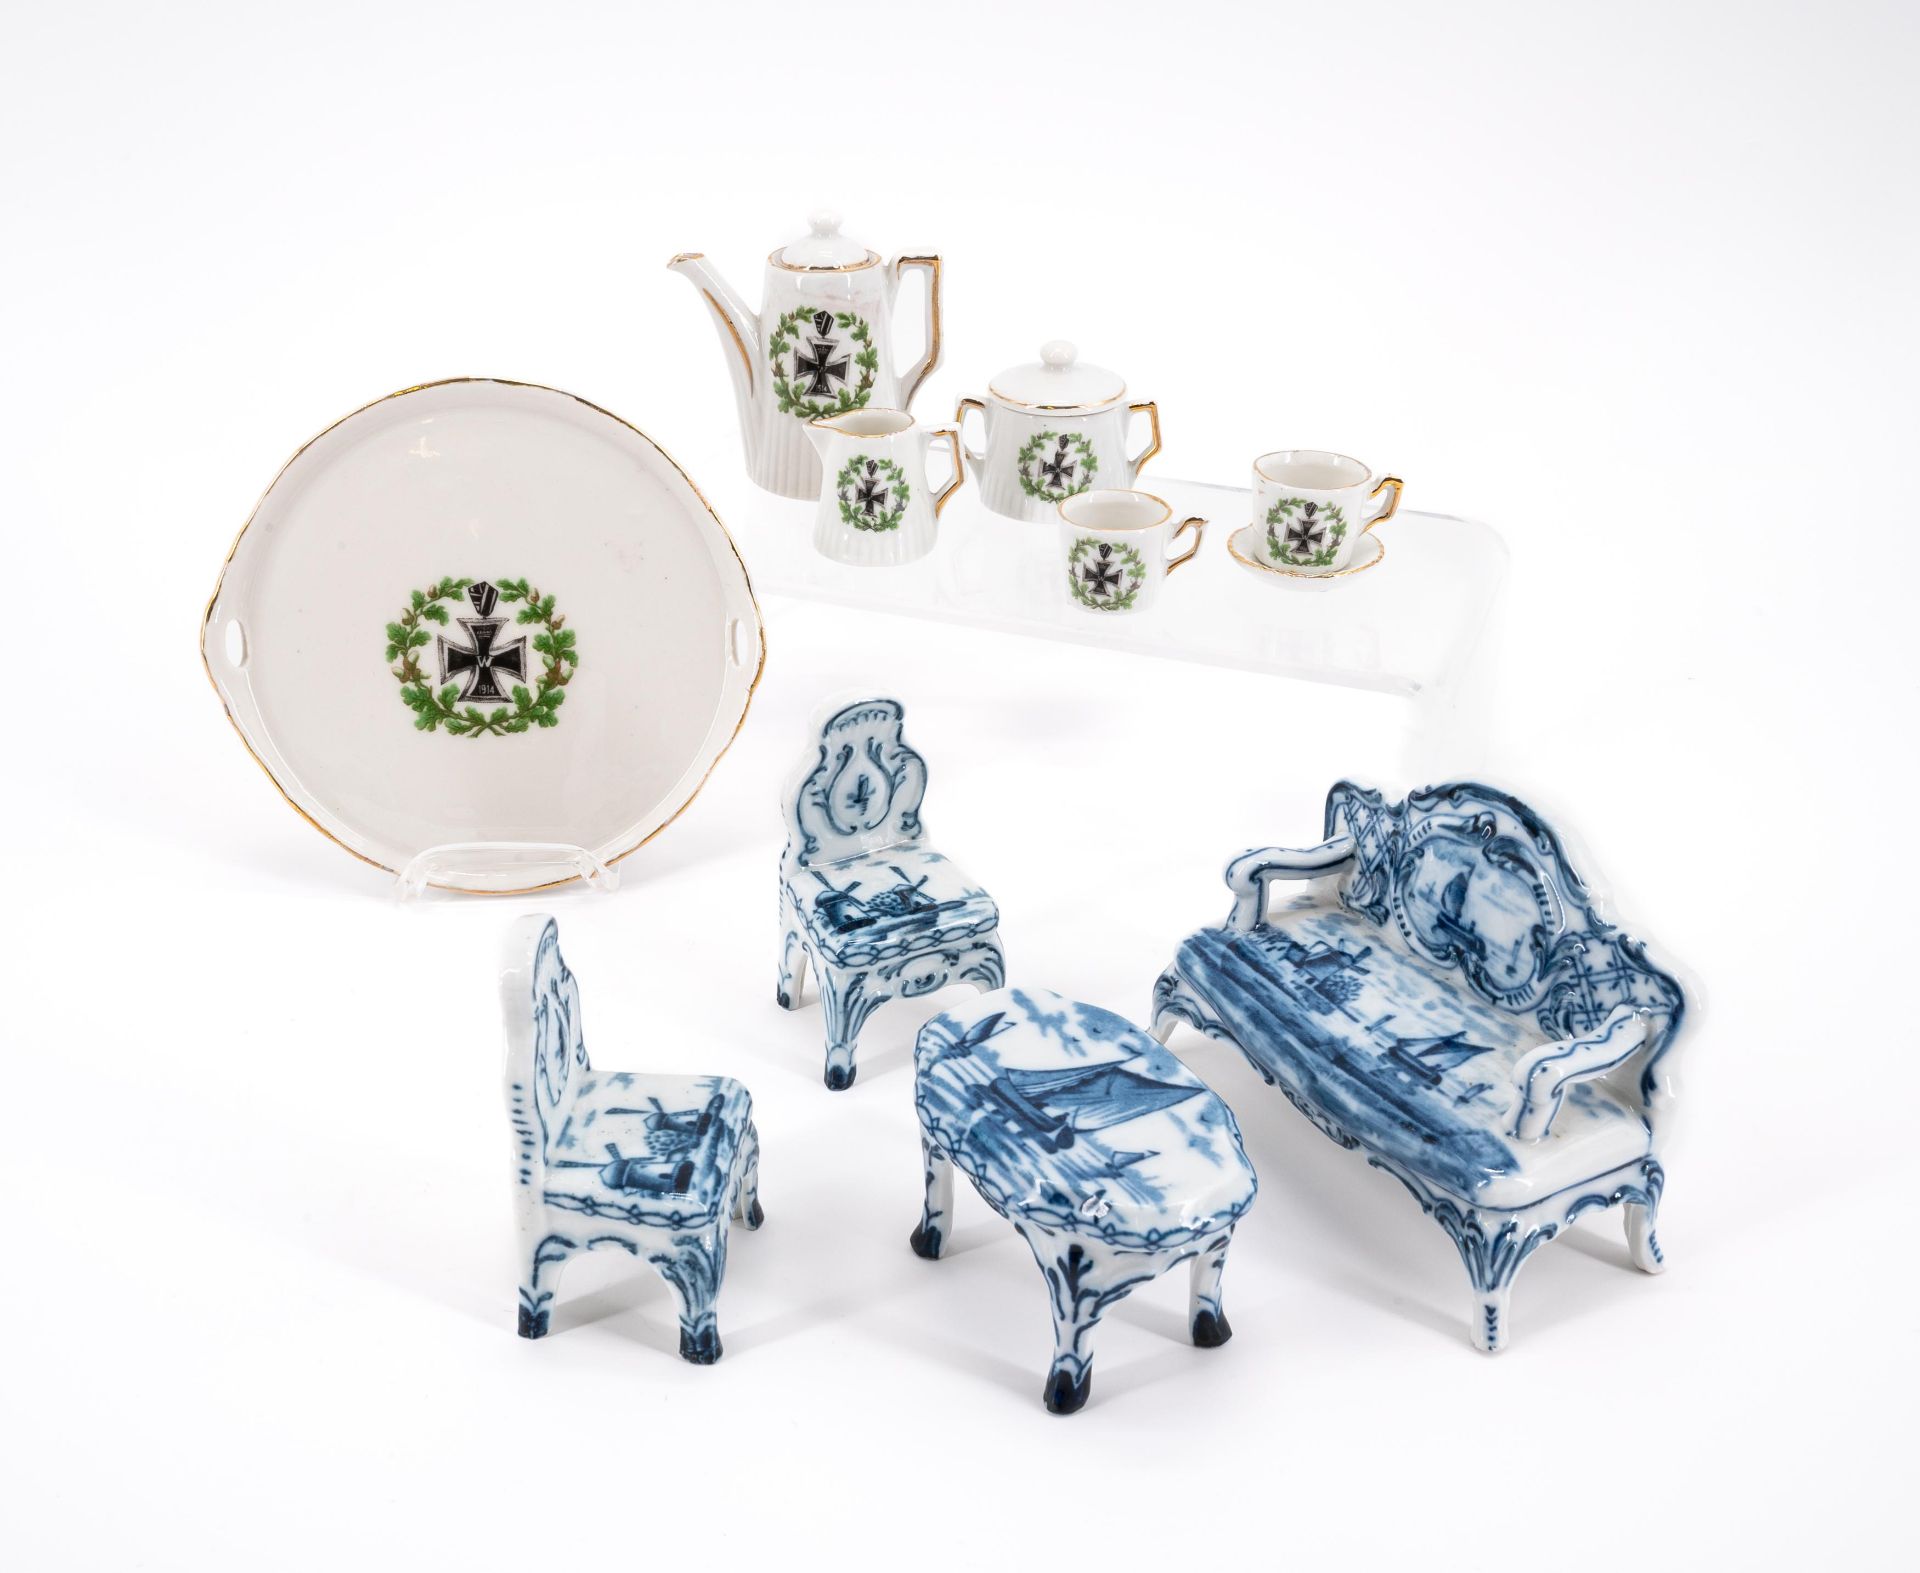 Netherlands: ENSEMBLE OF DELFT PORCELAIN MINIATURE FURNITURE AND A DÉJEUNER WITH IRON CROSS AND OAK 